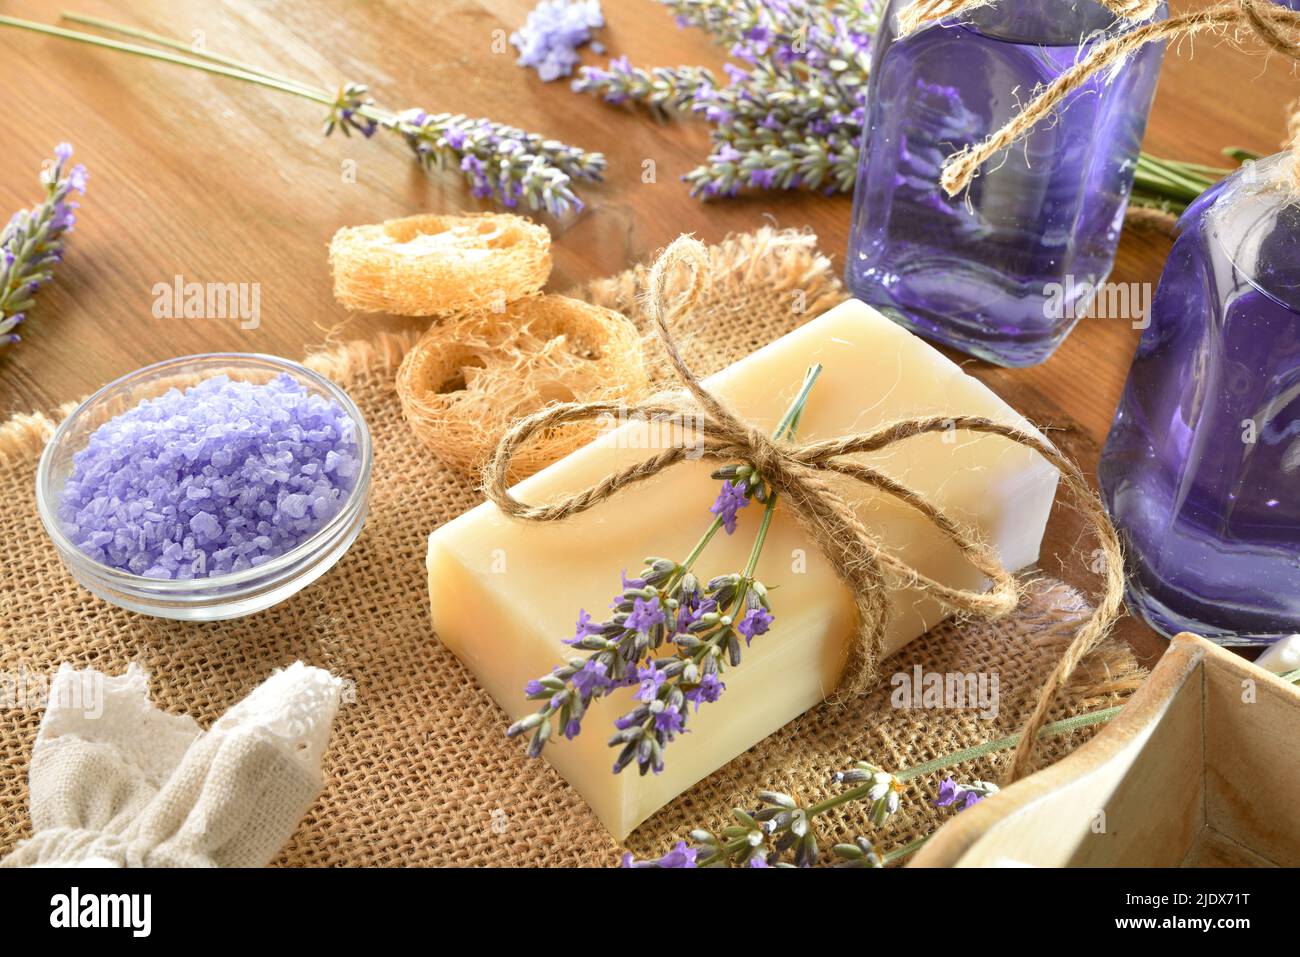 Set of natural lavender body care products on wooden table. Elevated view. Horizontal composition. Stock Photo